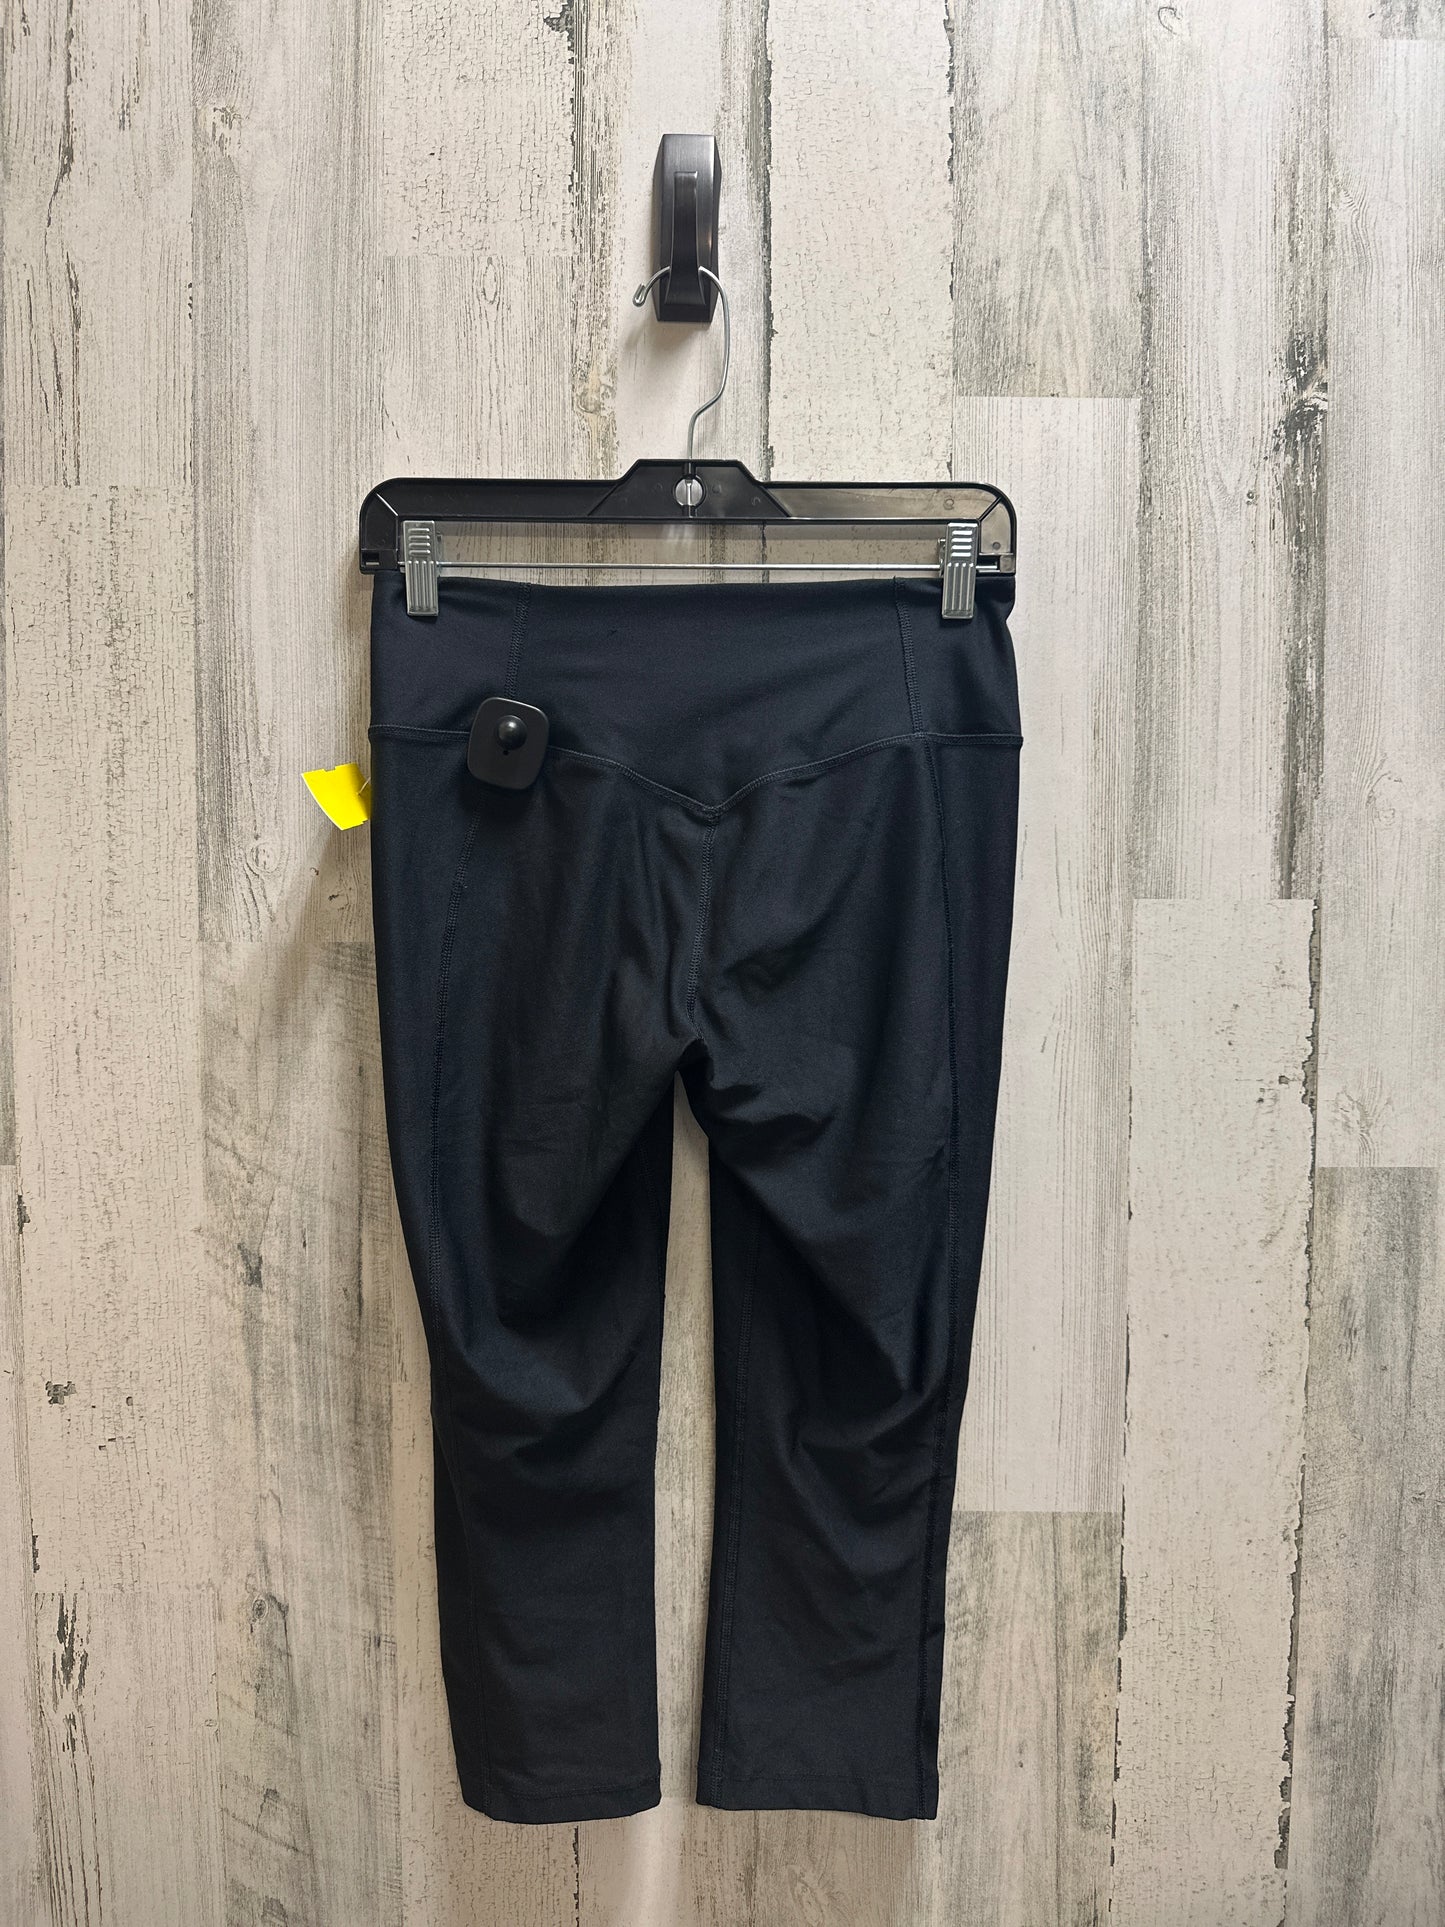 Athletic Leggings By Nike Apparel  Size: S